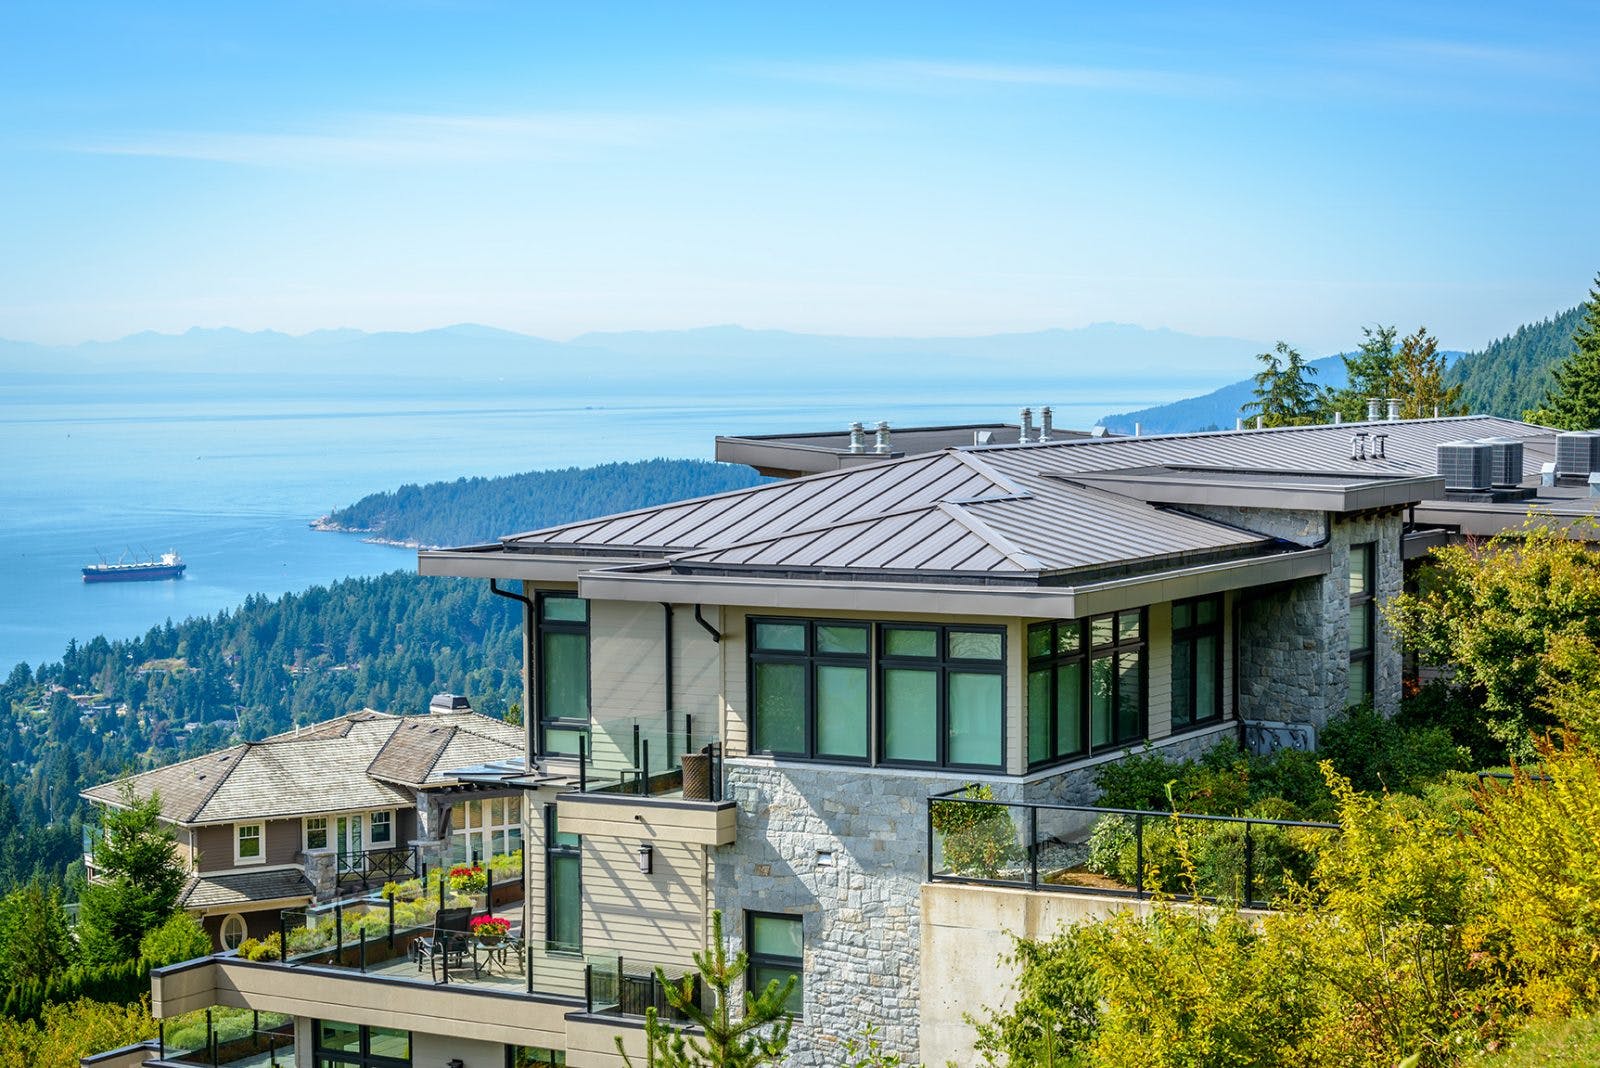 Luxury house with ocean view in Vancouver, Canada.